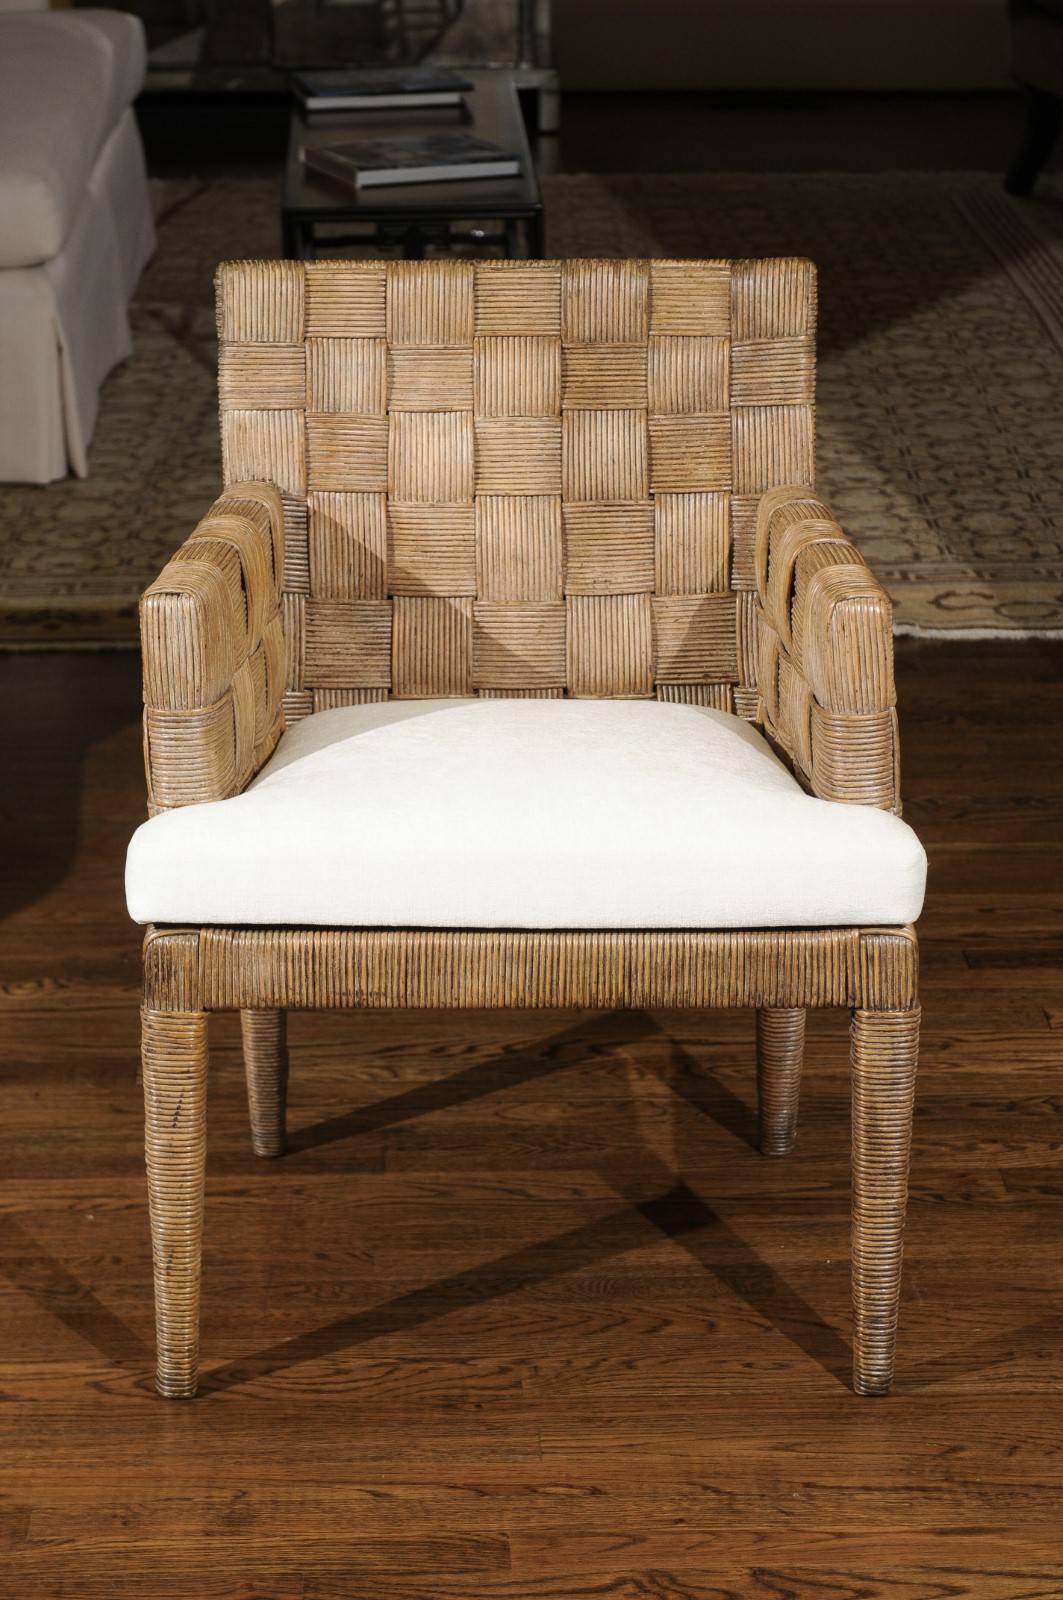 Magnificent Set of Eight Block Island Dining Chairs by John Hutton for Donghia 1